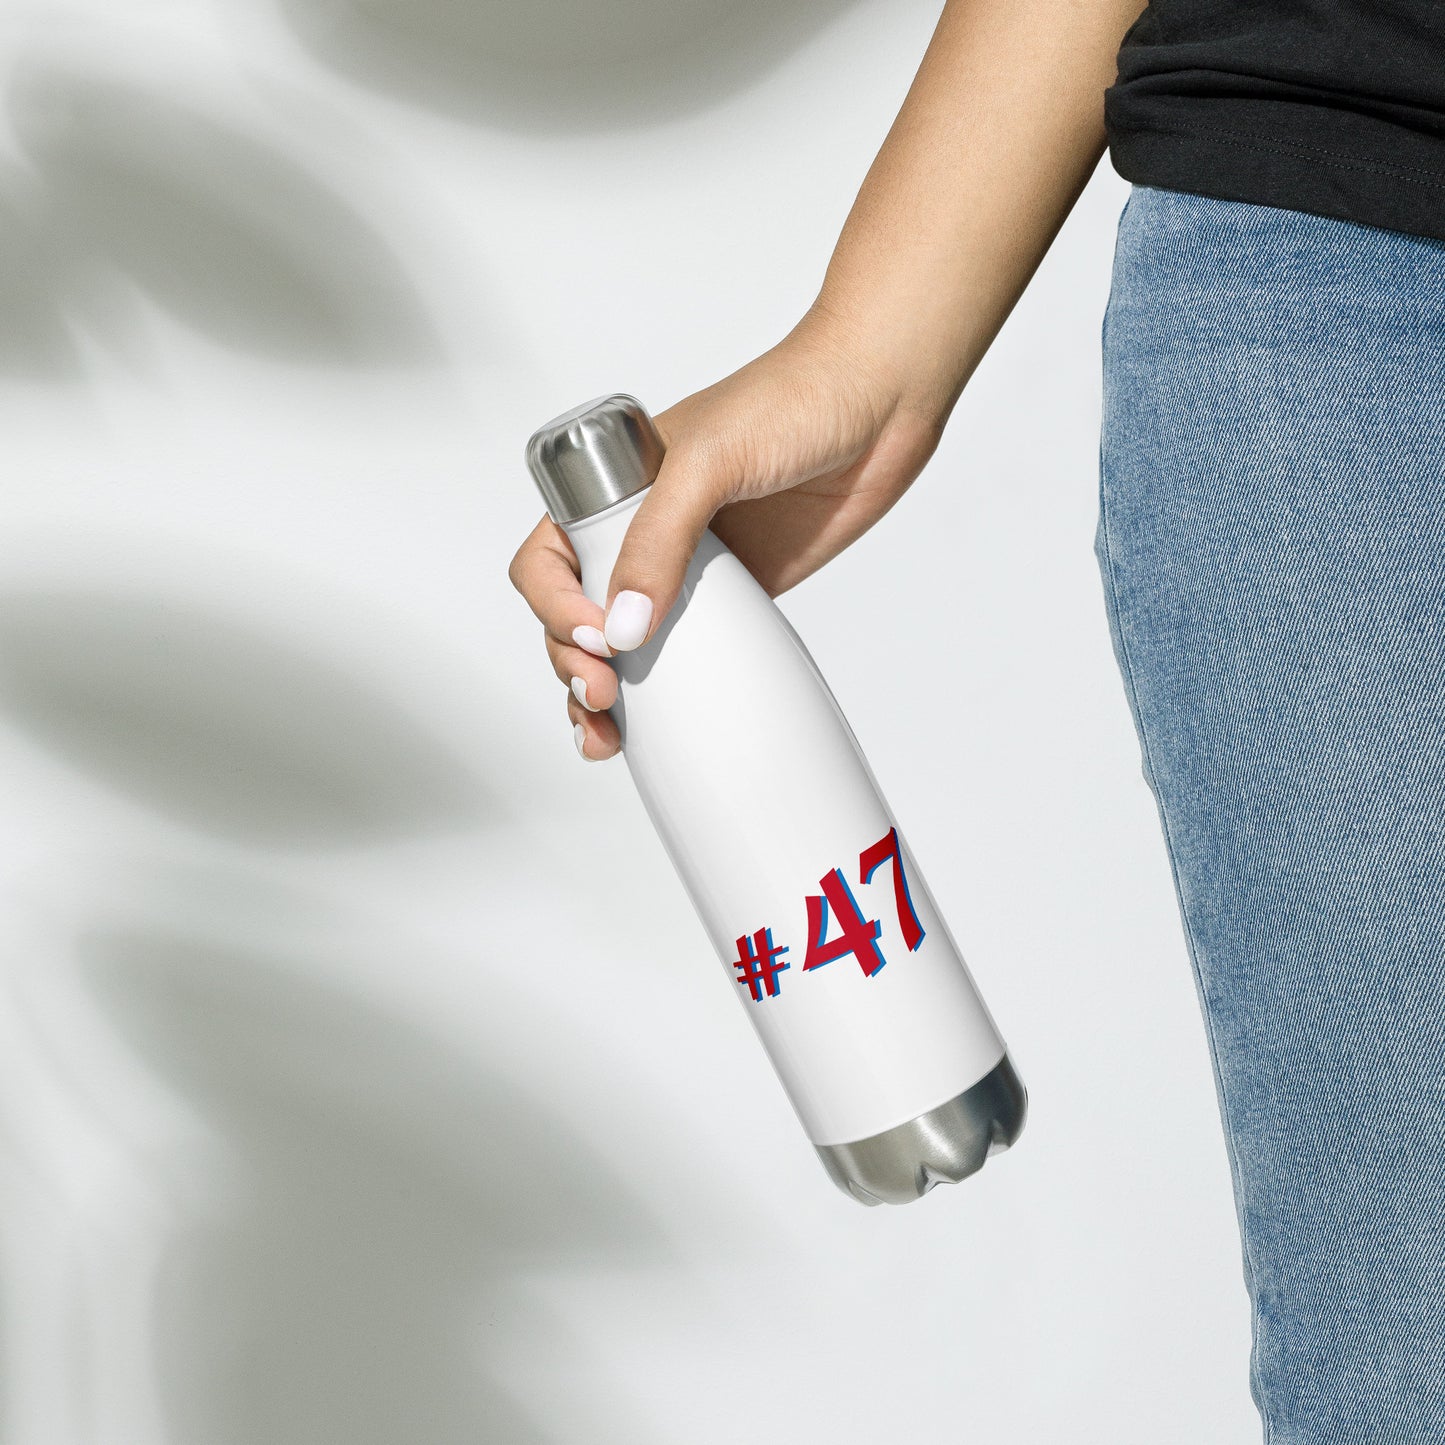 #47 "Style A" Stainless steel water bottle